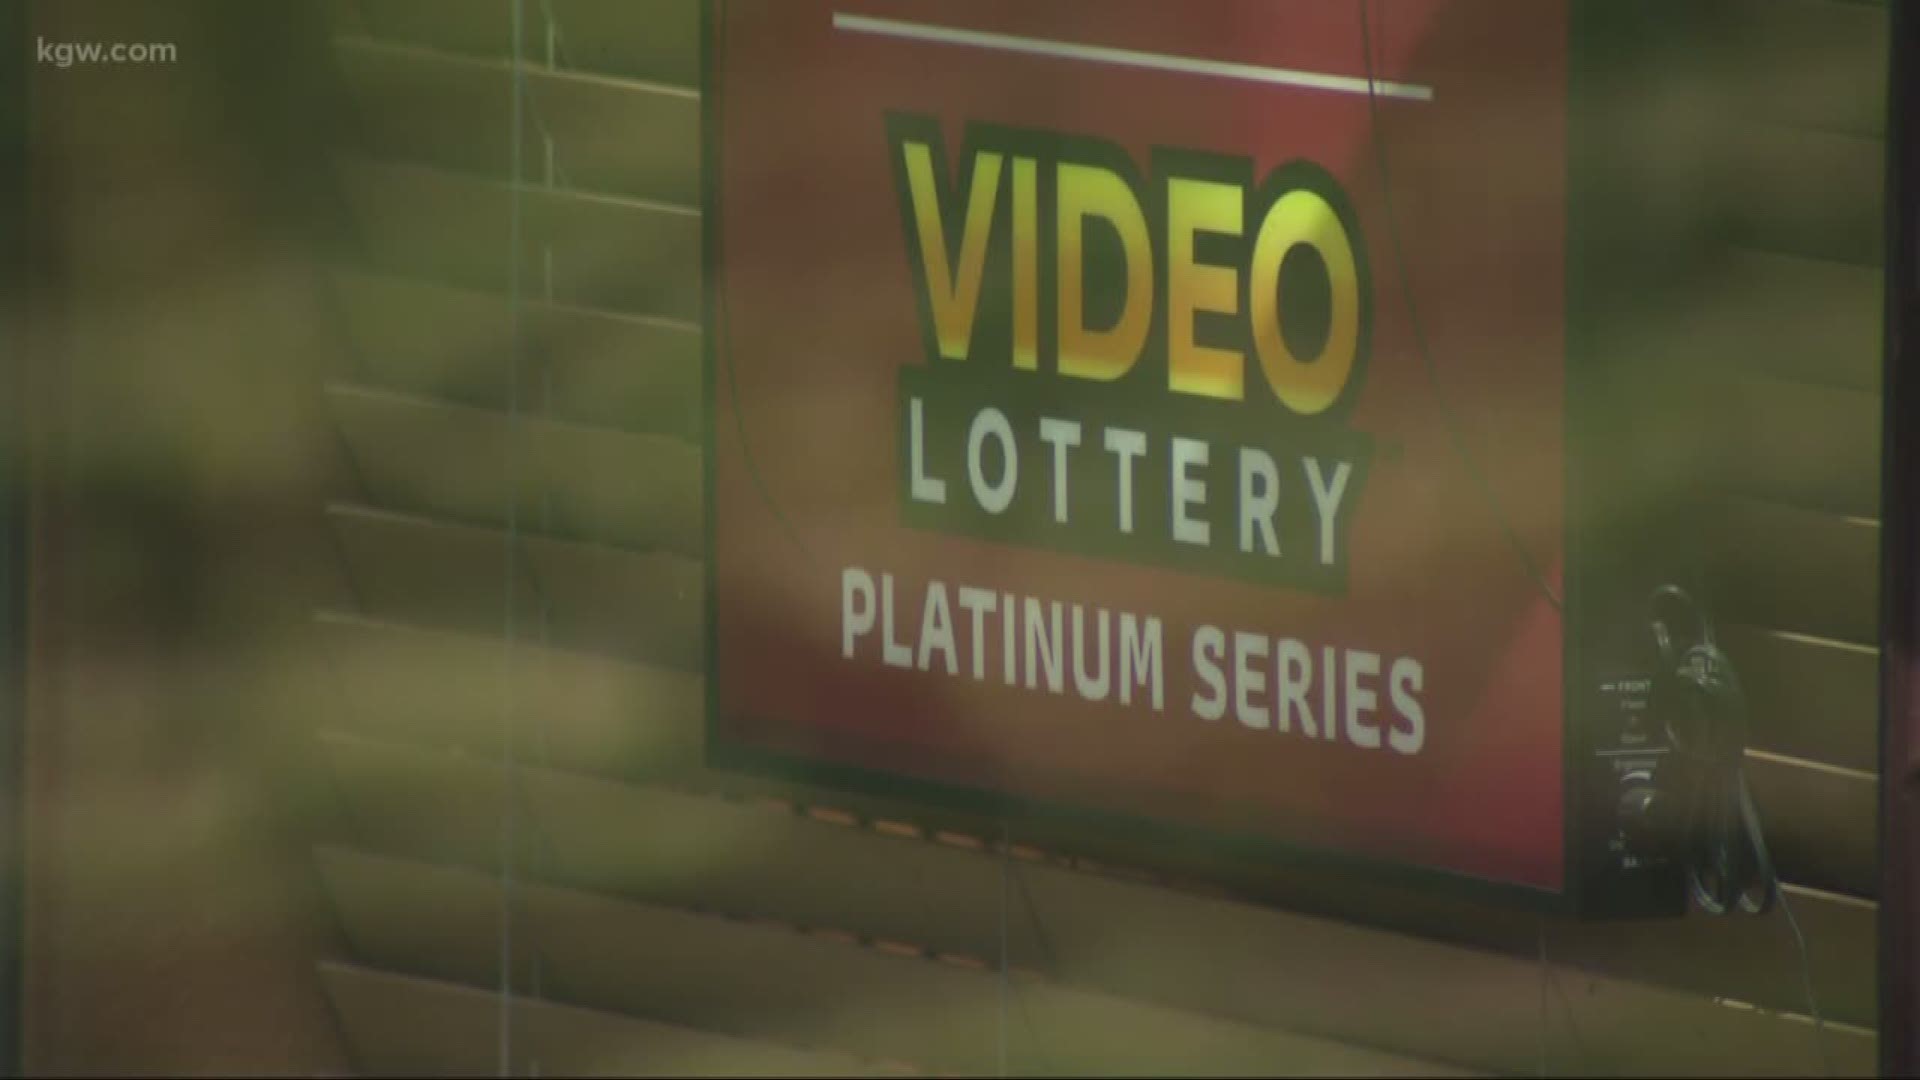 In gambling, they say the house always wins but right now the Oregon Lottery is losing, lots.